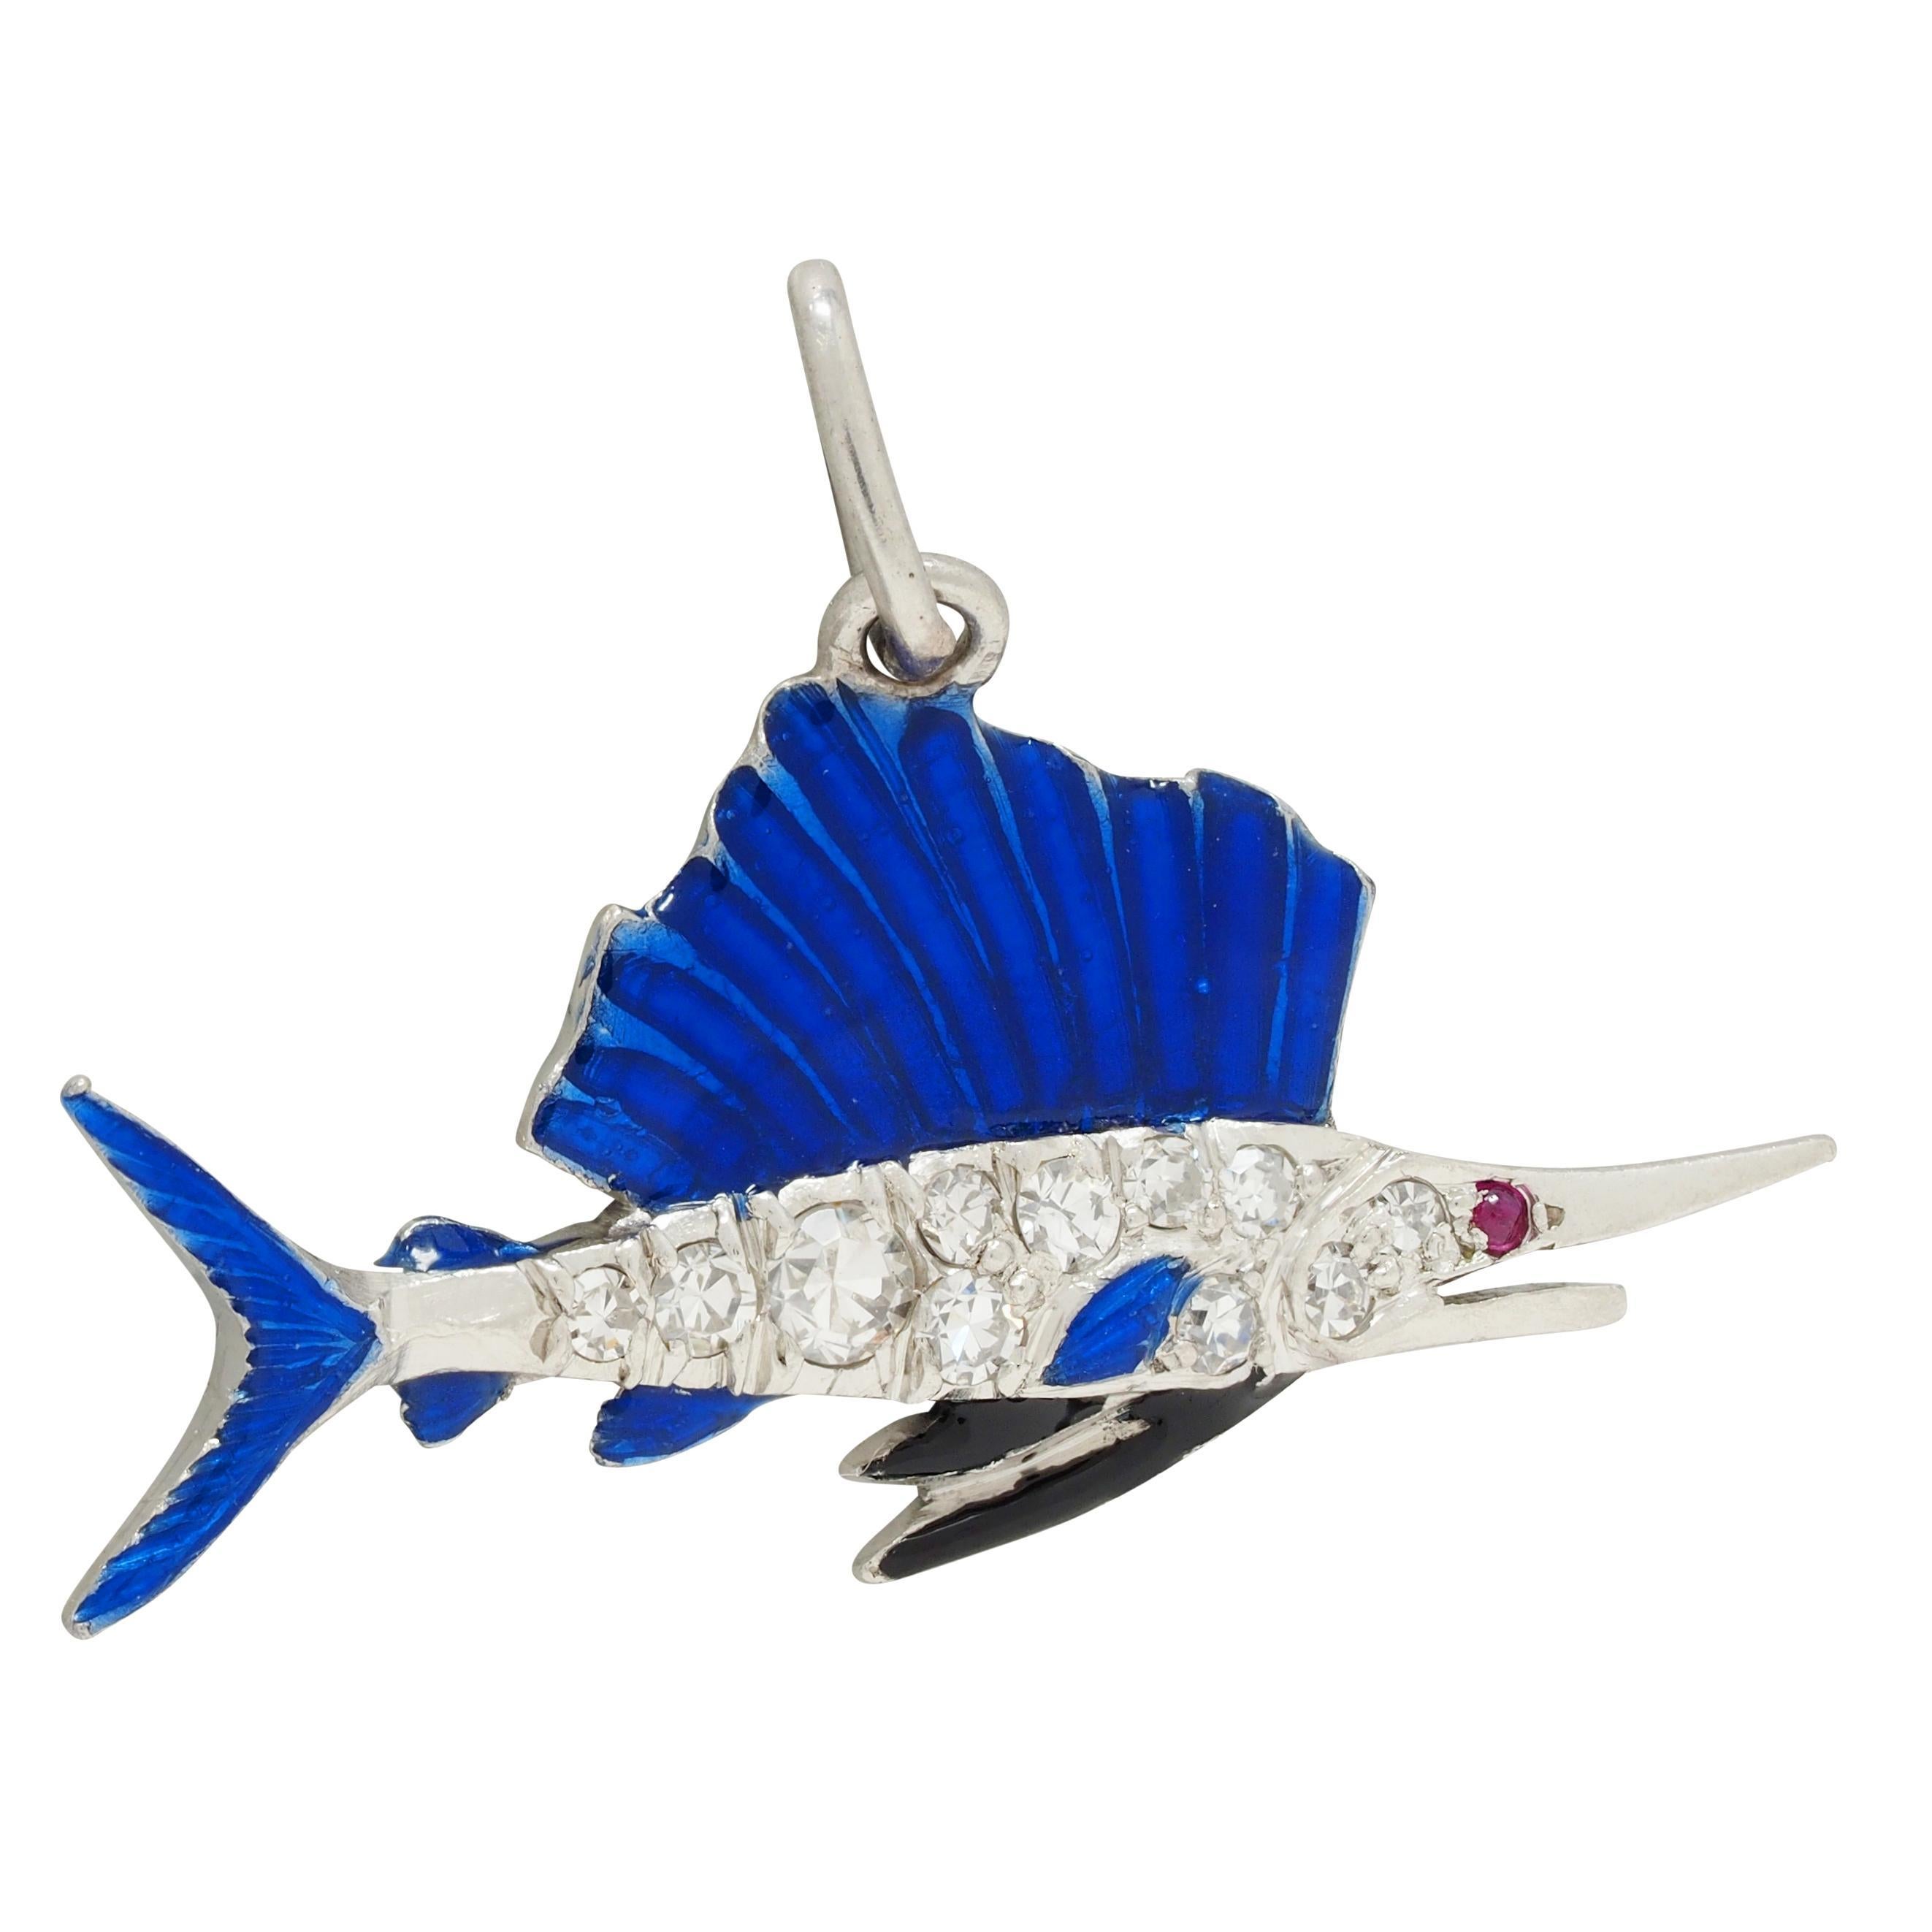 Designed as a swordfish with pavé set single cut diamonds throughout 
Weighing approximately 0.10 carat total - eye clean and bright
Featuring enameled fins - transparent blue and black 
Glossed over linear engraving on back fin - exhibiting minimal